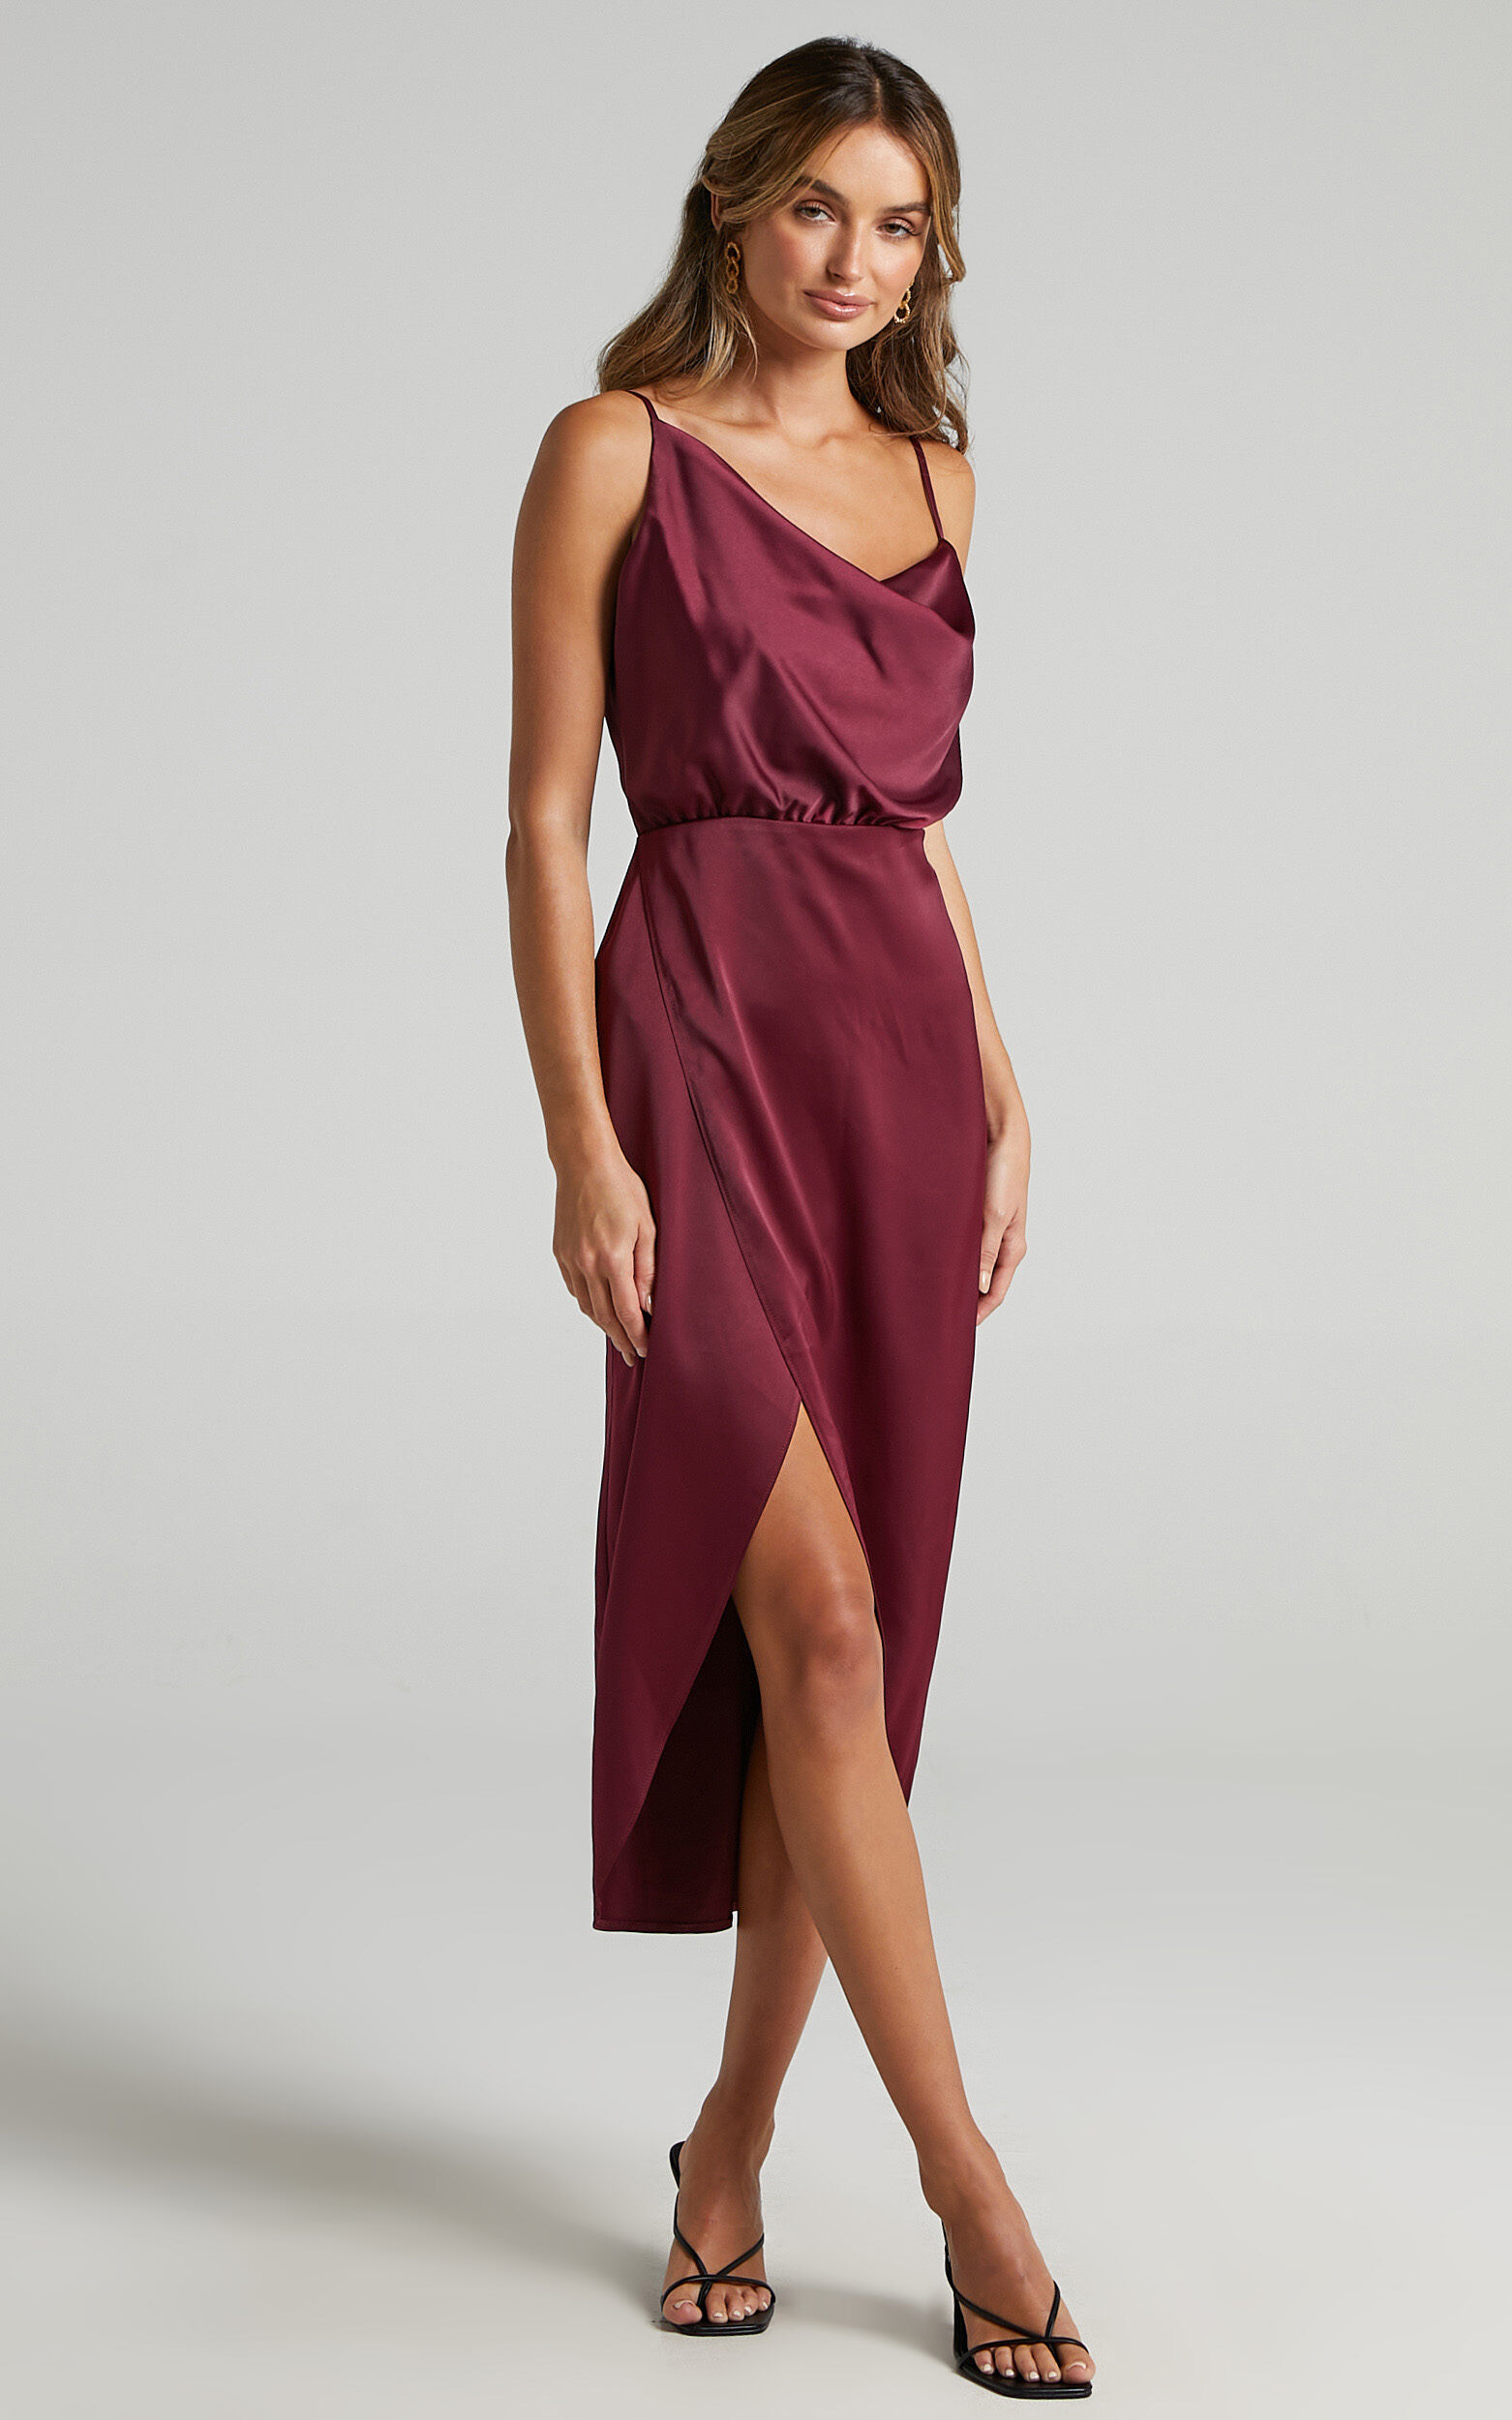 Sisters by Heart Asymmetric Cowl Neck Midi Dress in Mulberry Satin - 06, PNK2, super-hi-res image number null